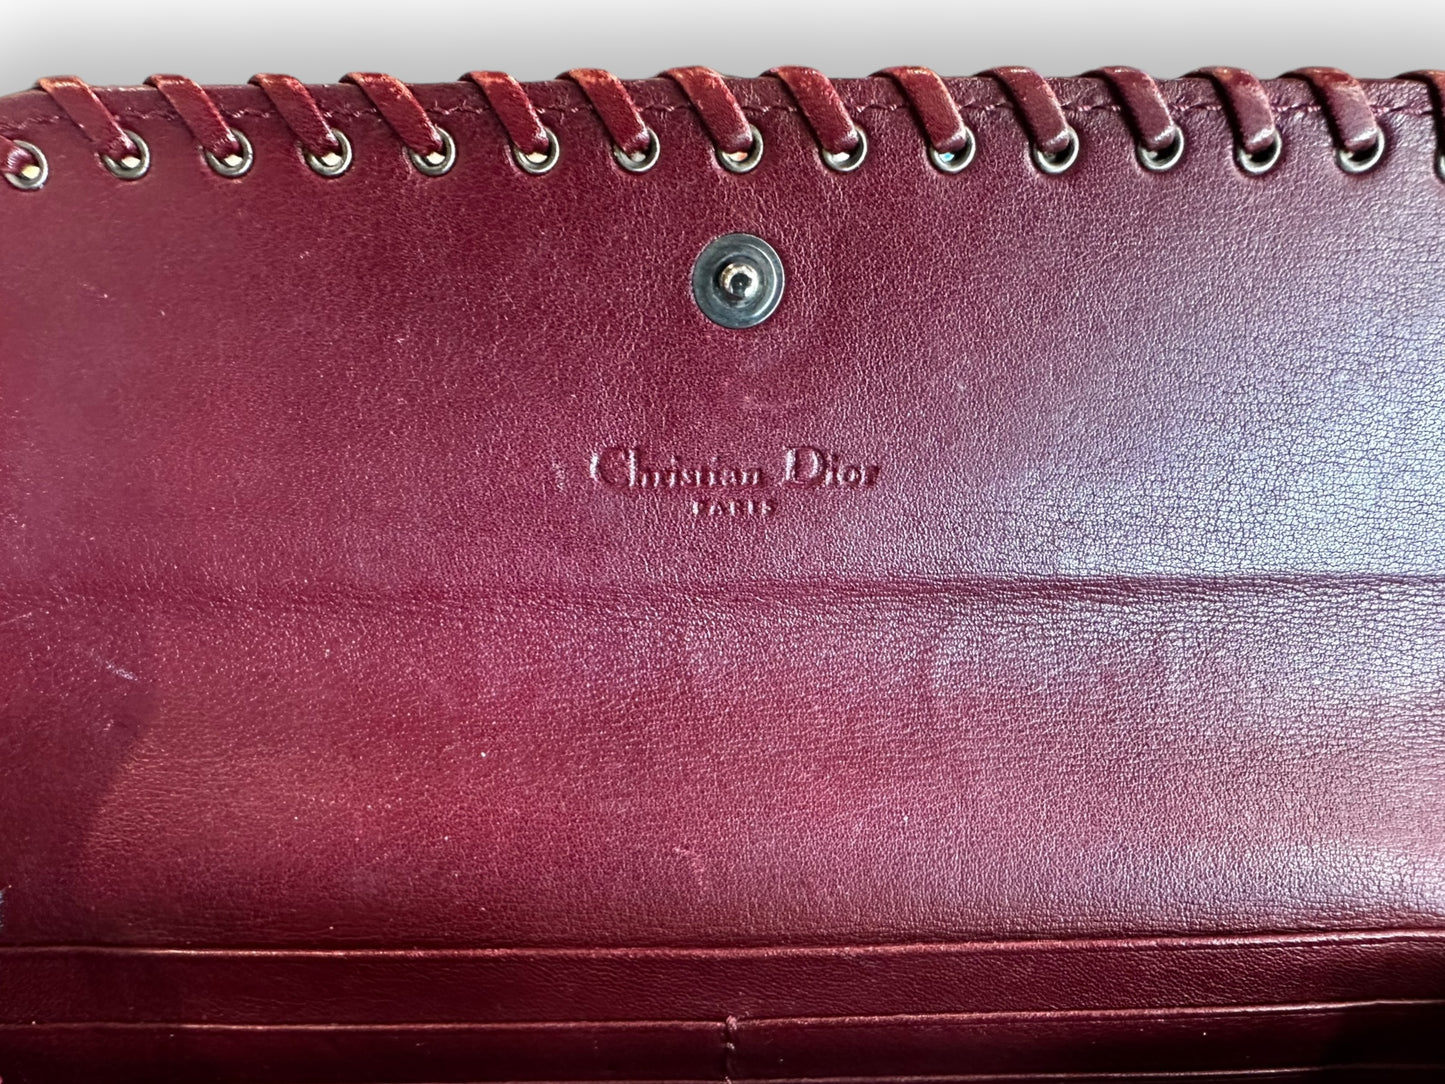 Dior Burgundy Woven Leather Trim and Canvas Continental Wallet